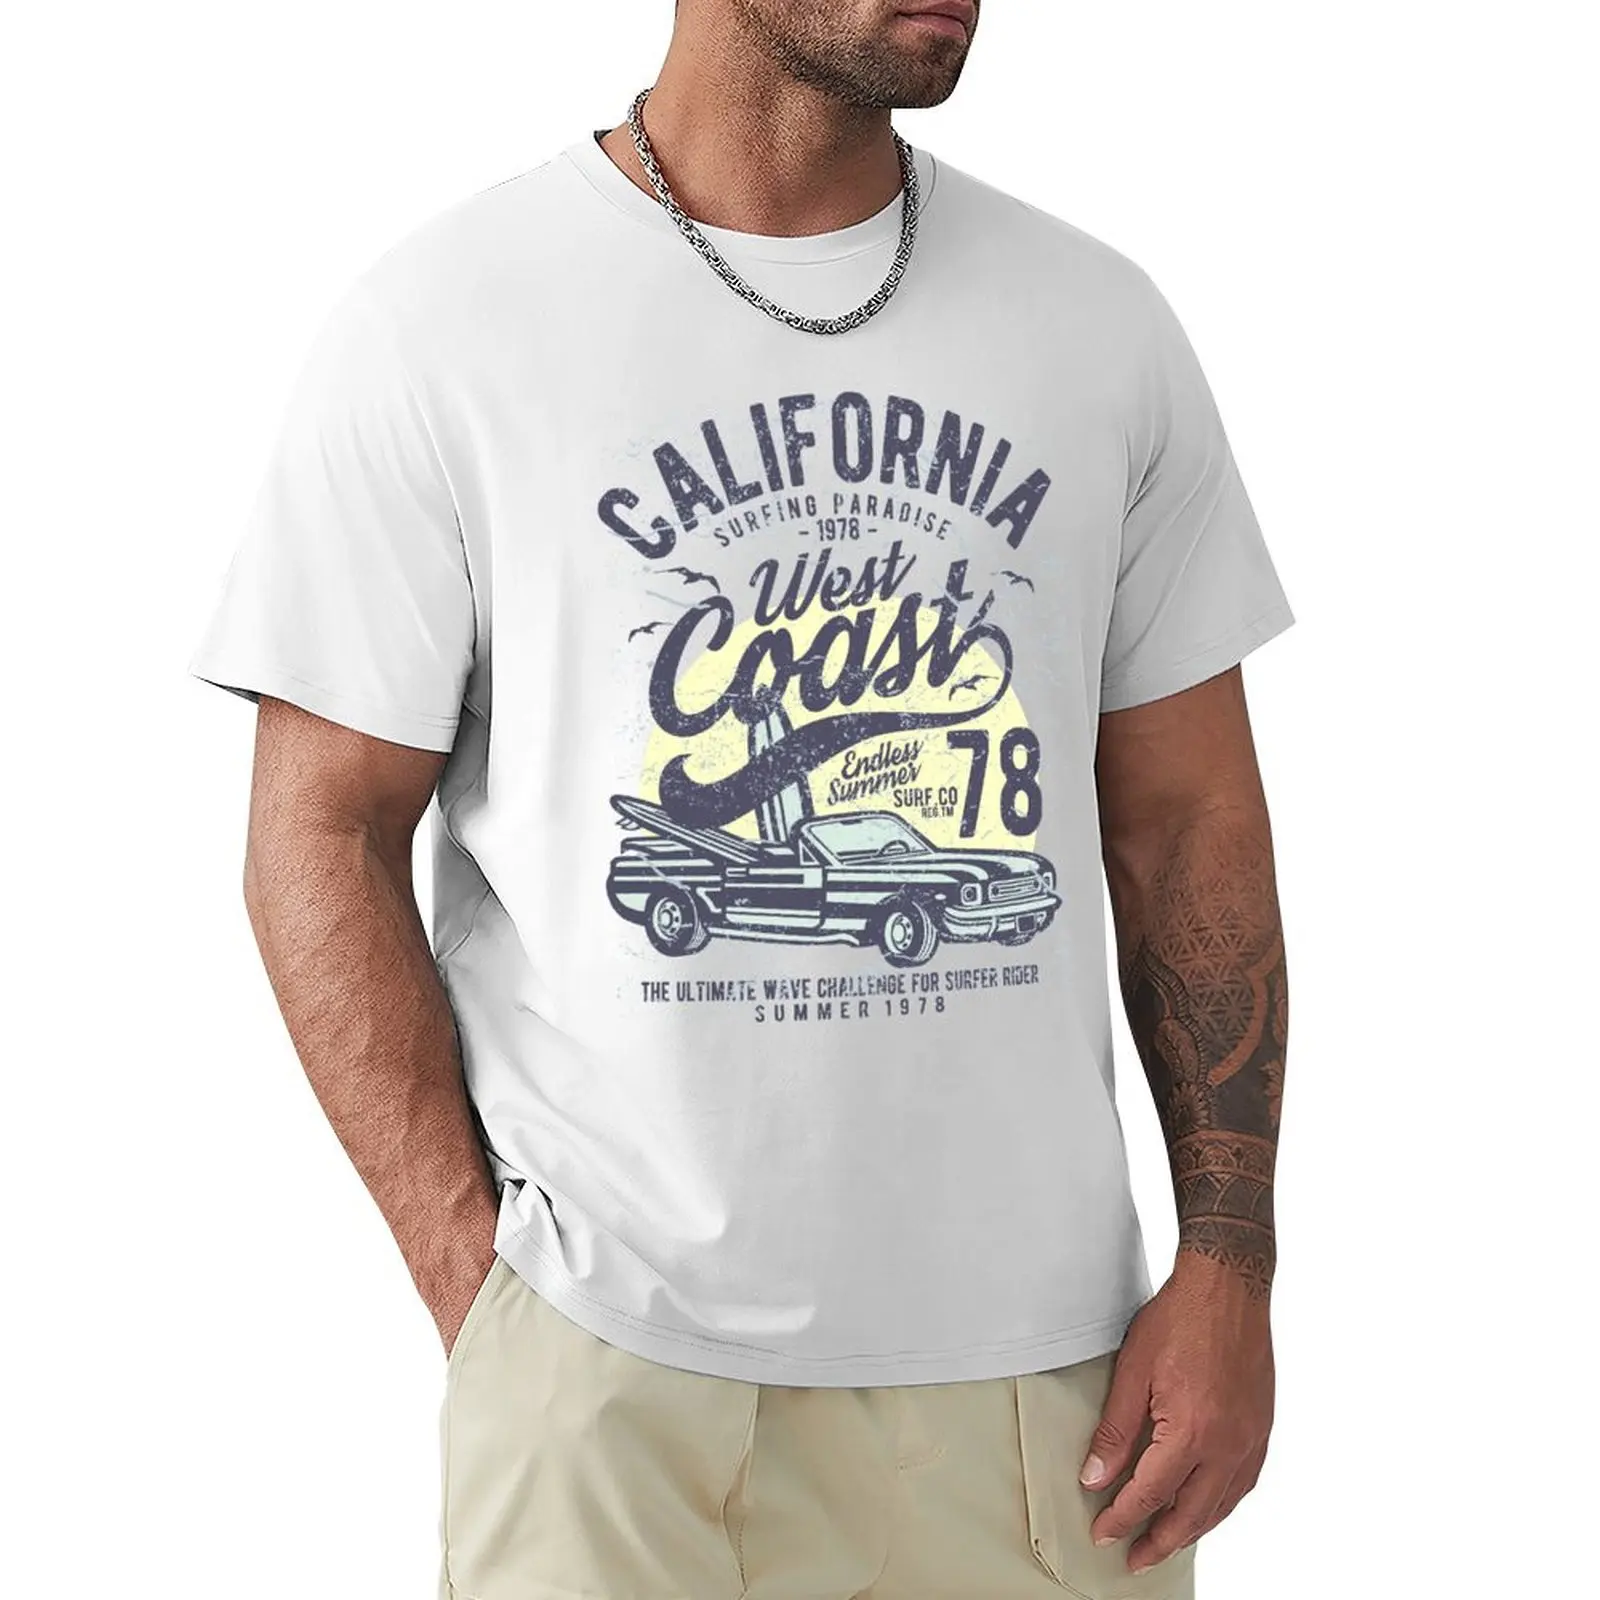 

California Surfing Paradise. West Coast. 1978 T-Shirt tees plus sizes vintage clothes big and tall t shirts for men